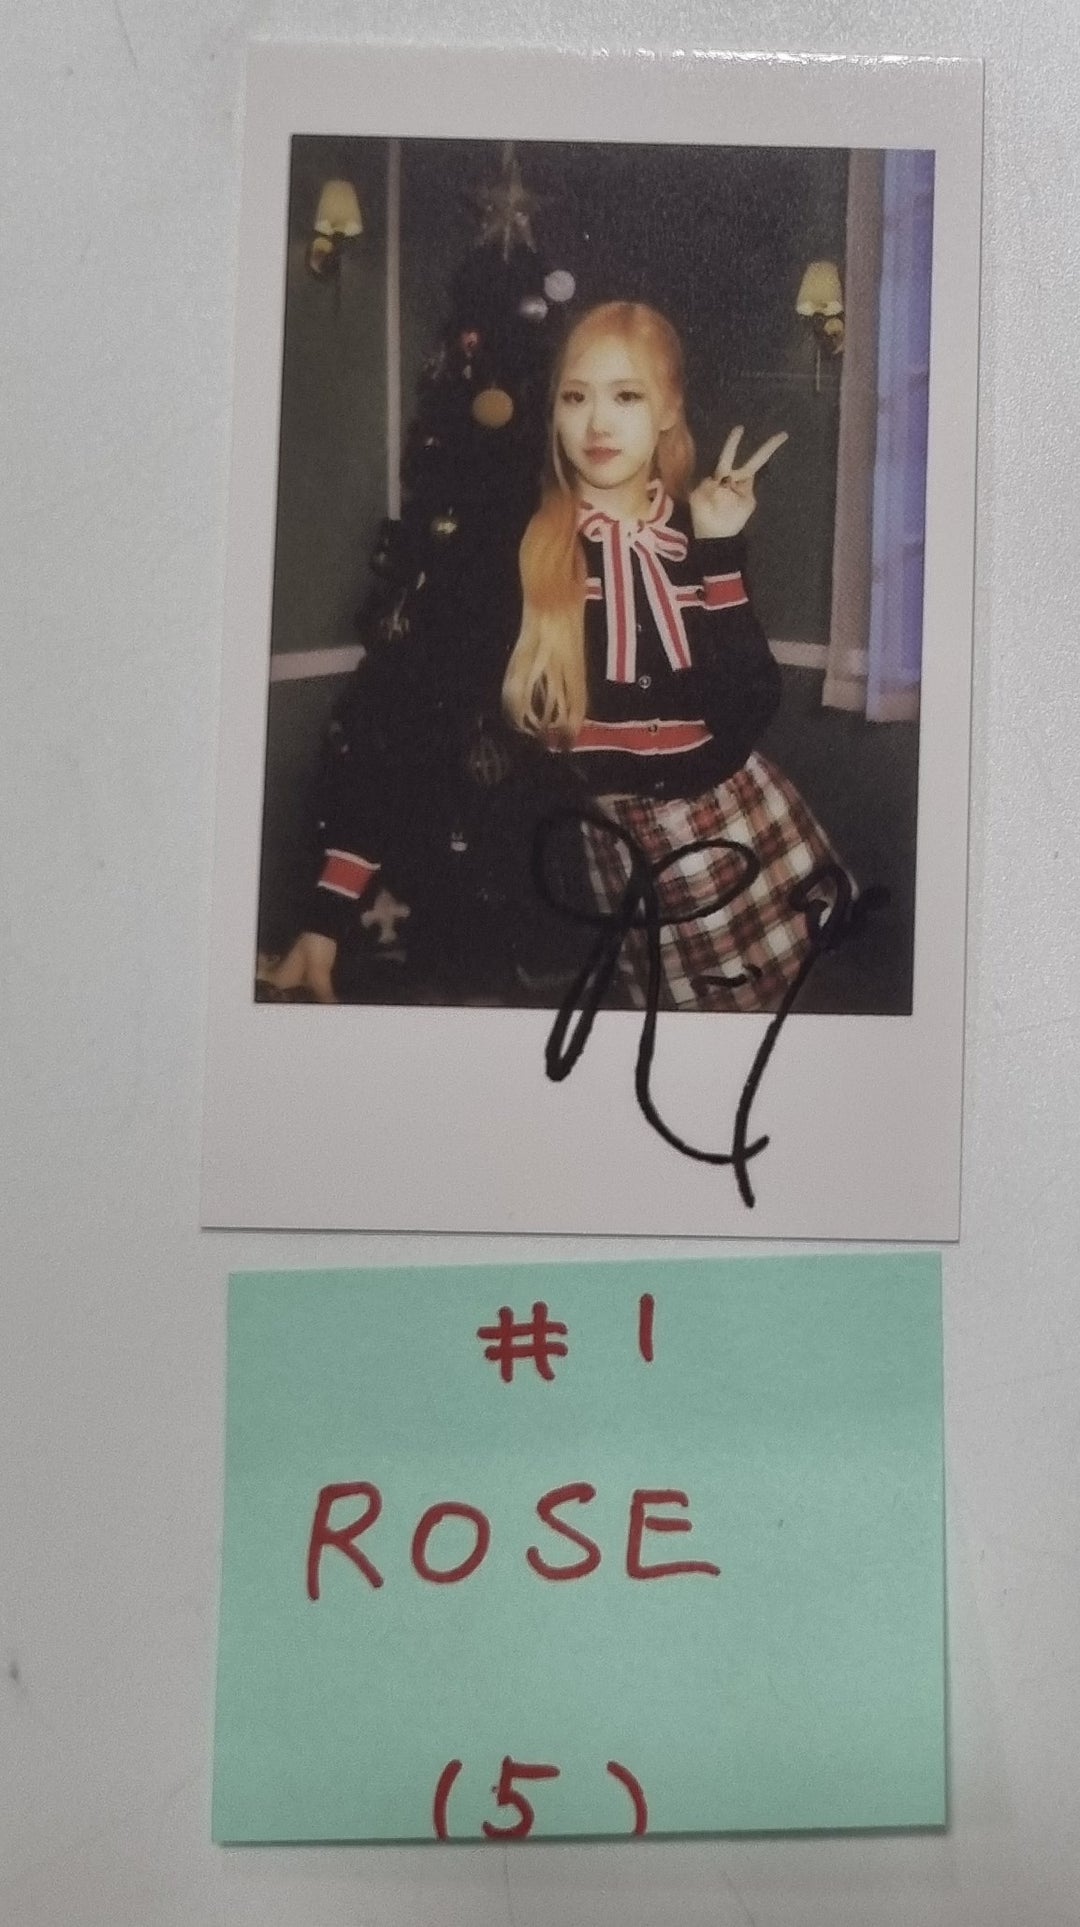 BLACKPINK「THE GAME PHOTOCARD COLLECTION CHRISTMAS EDITION」 - 公式フォトカード、二つ折りカレンダーポスター [24.1.8]